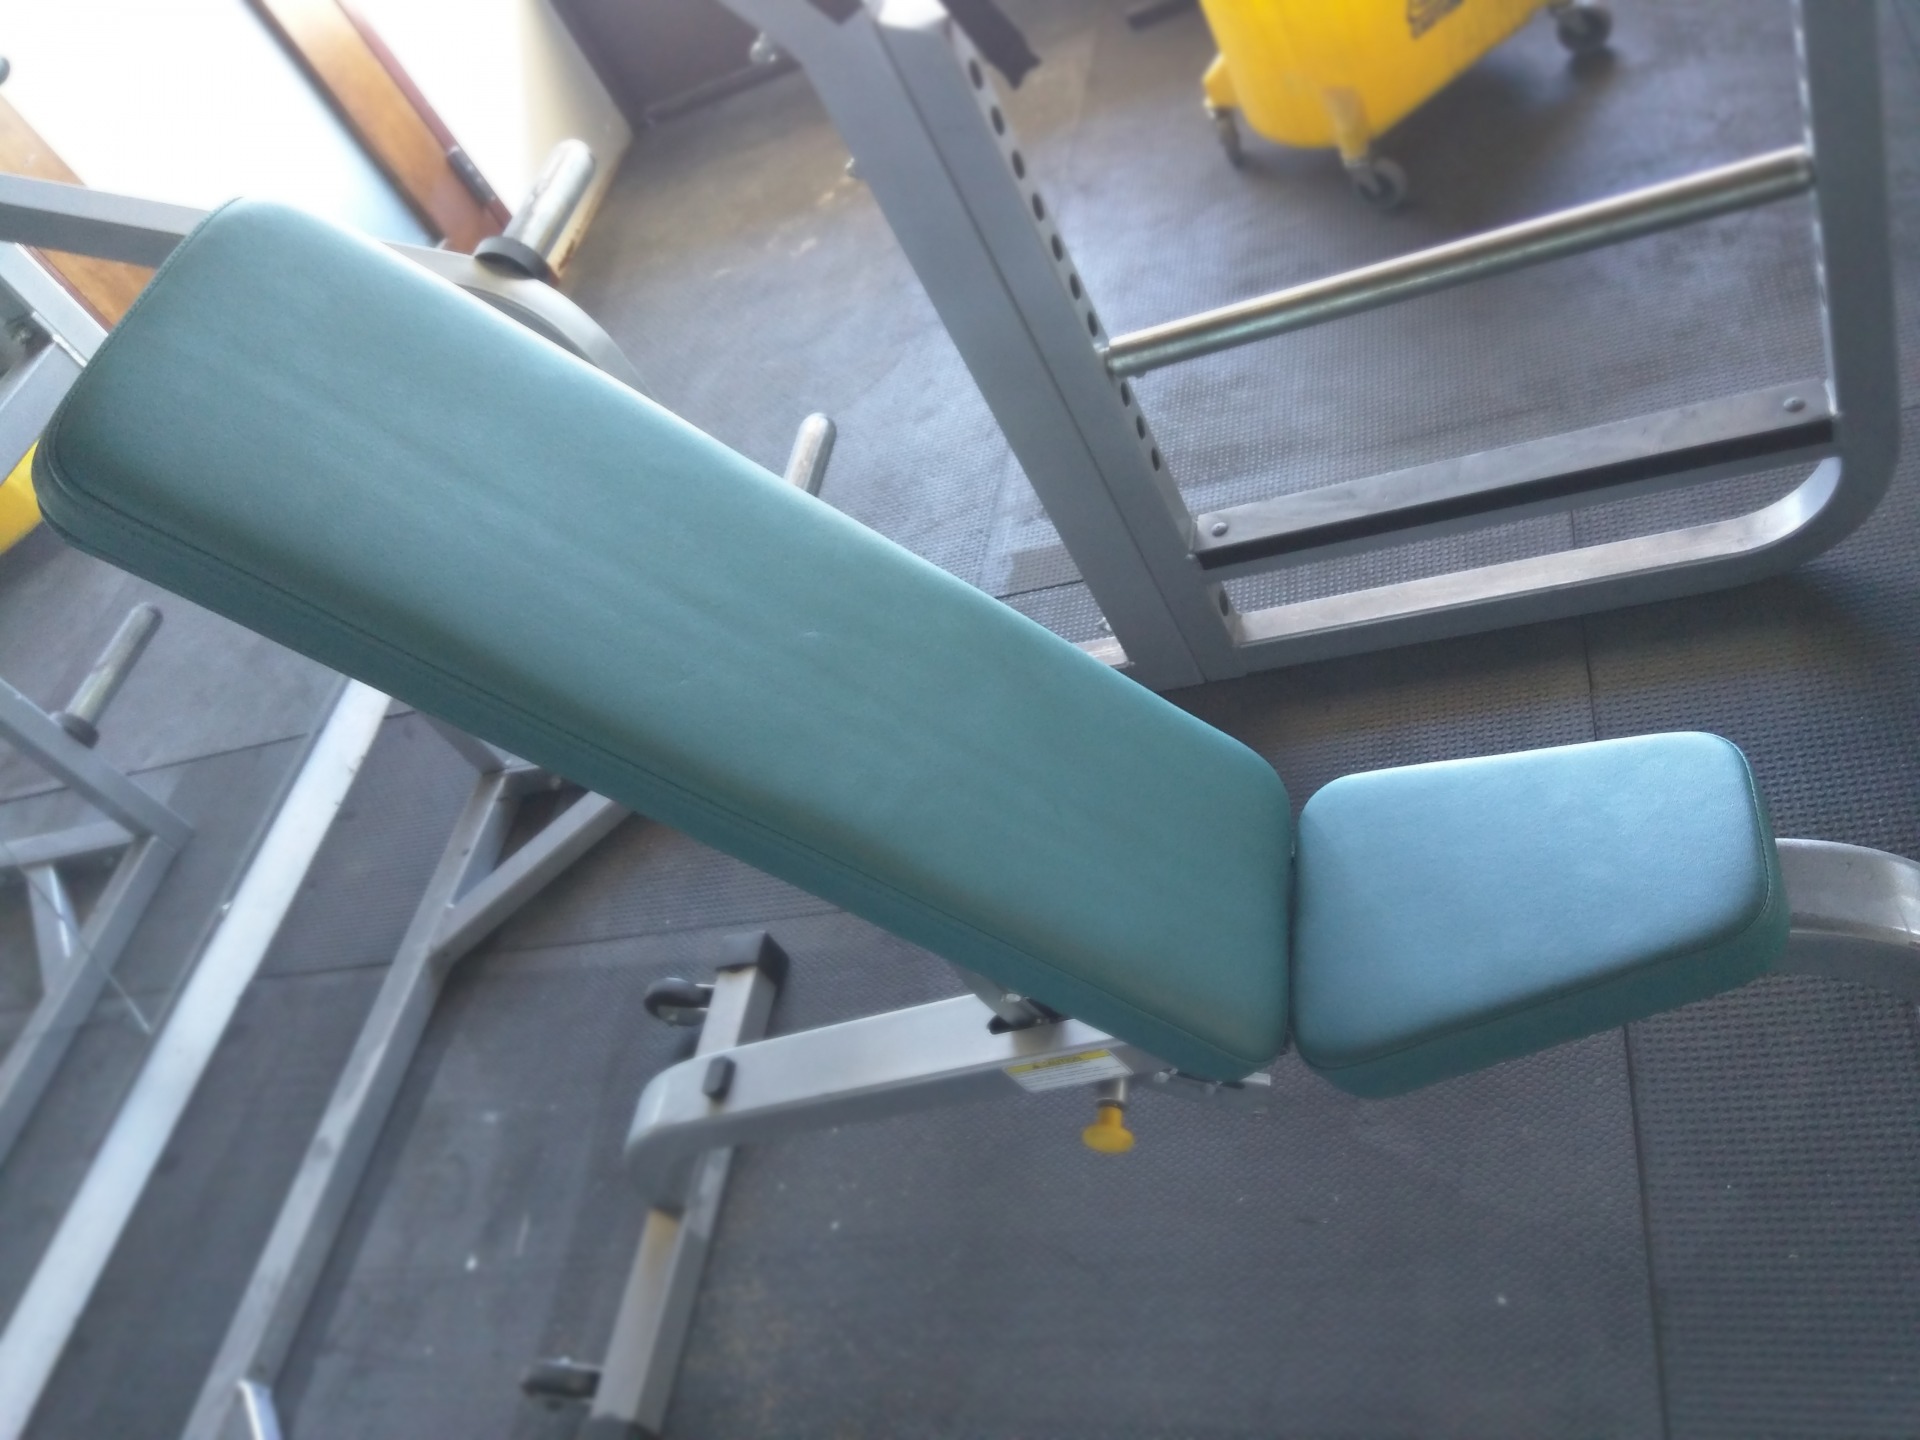 Cybex Adjustable Incline Bench Fitness Equipment Reupholstered in BoltaSport Olympus Grotto